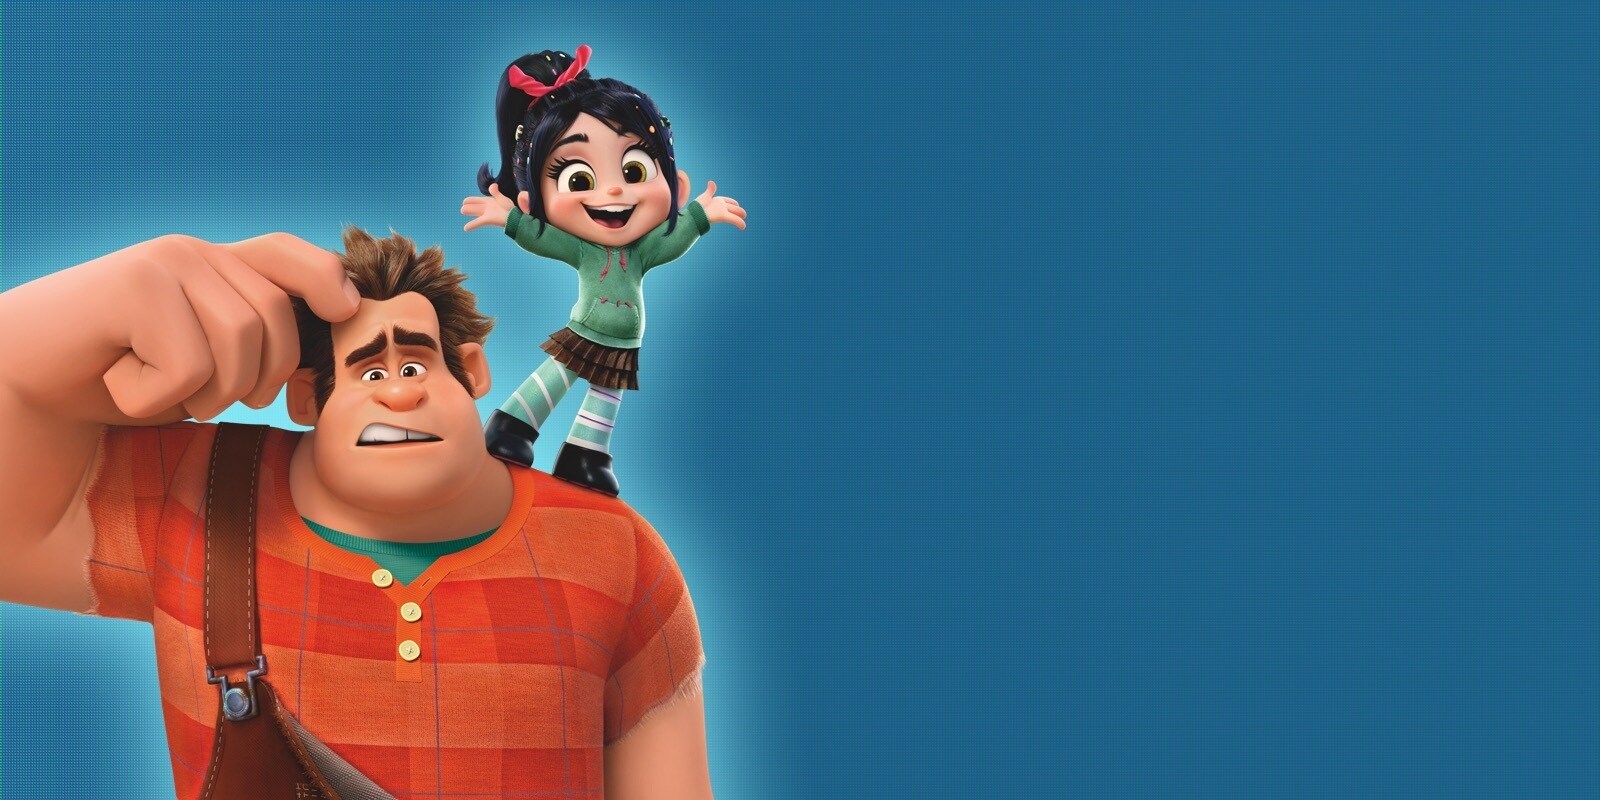 Wreck-It Ralph 2 | Synopsis